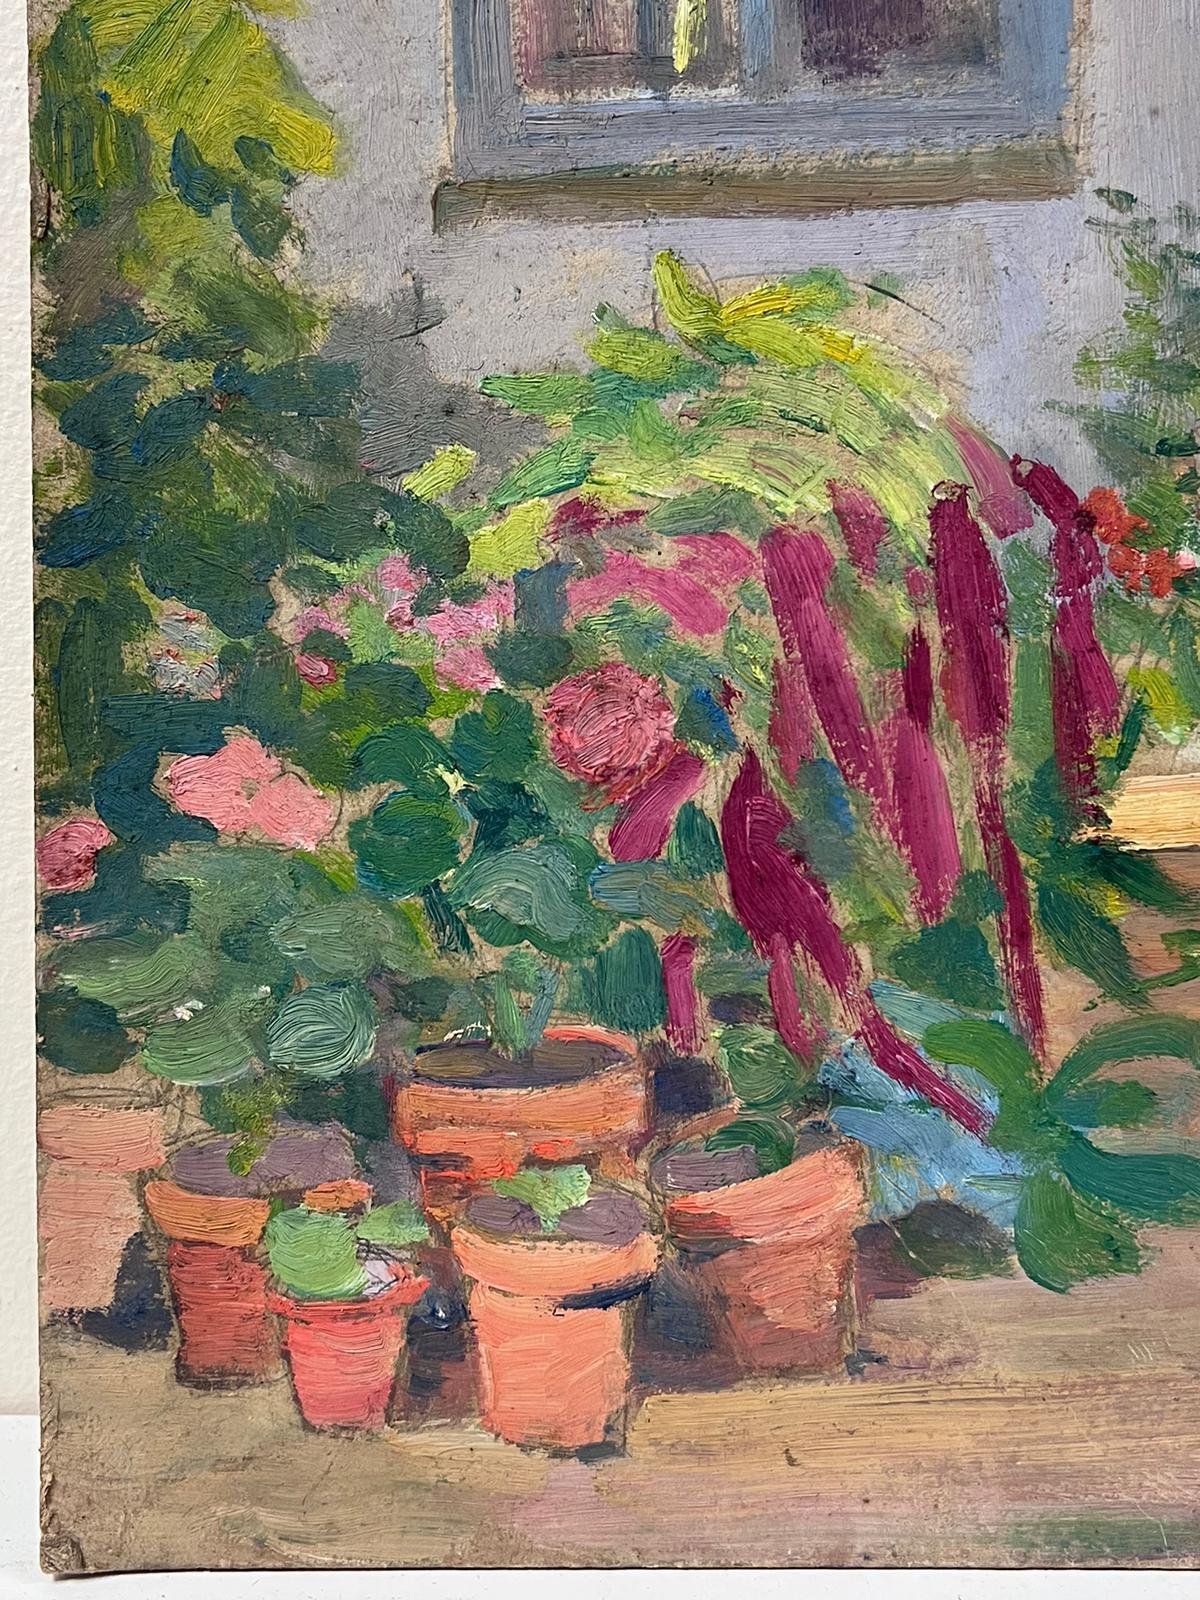 Garden Pots
by Louise Alix (French, 1888-1980) *see notes below
provenance stamp to the back 
oil painting on board, unframed
measures: 13 high by 9.5 inches wide
condition: overall very good and sound, a few scuffs and marks to the surface and wear